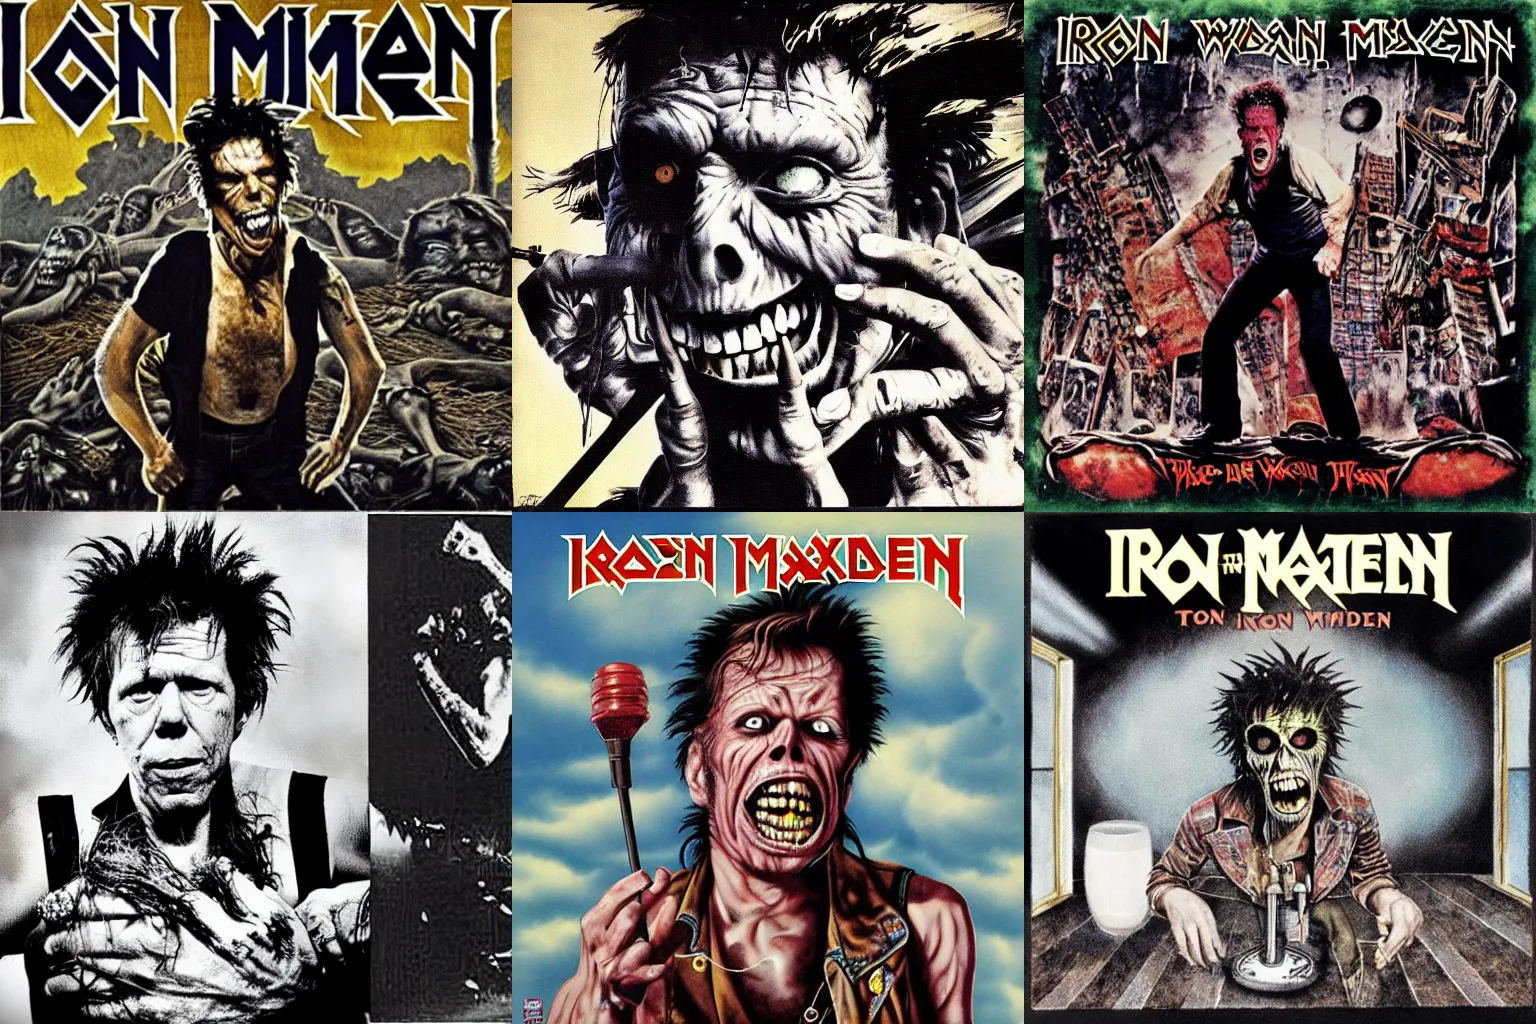 Prompt: Tom Waits as Eddie on Iron Maiden album covers